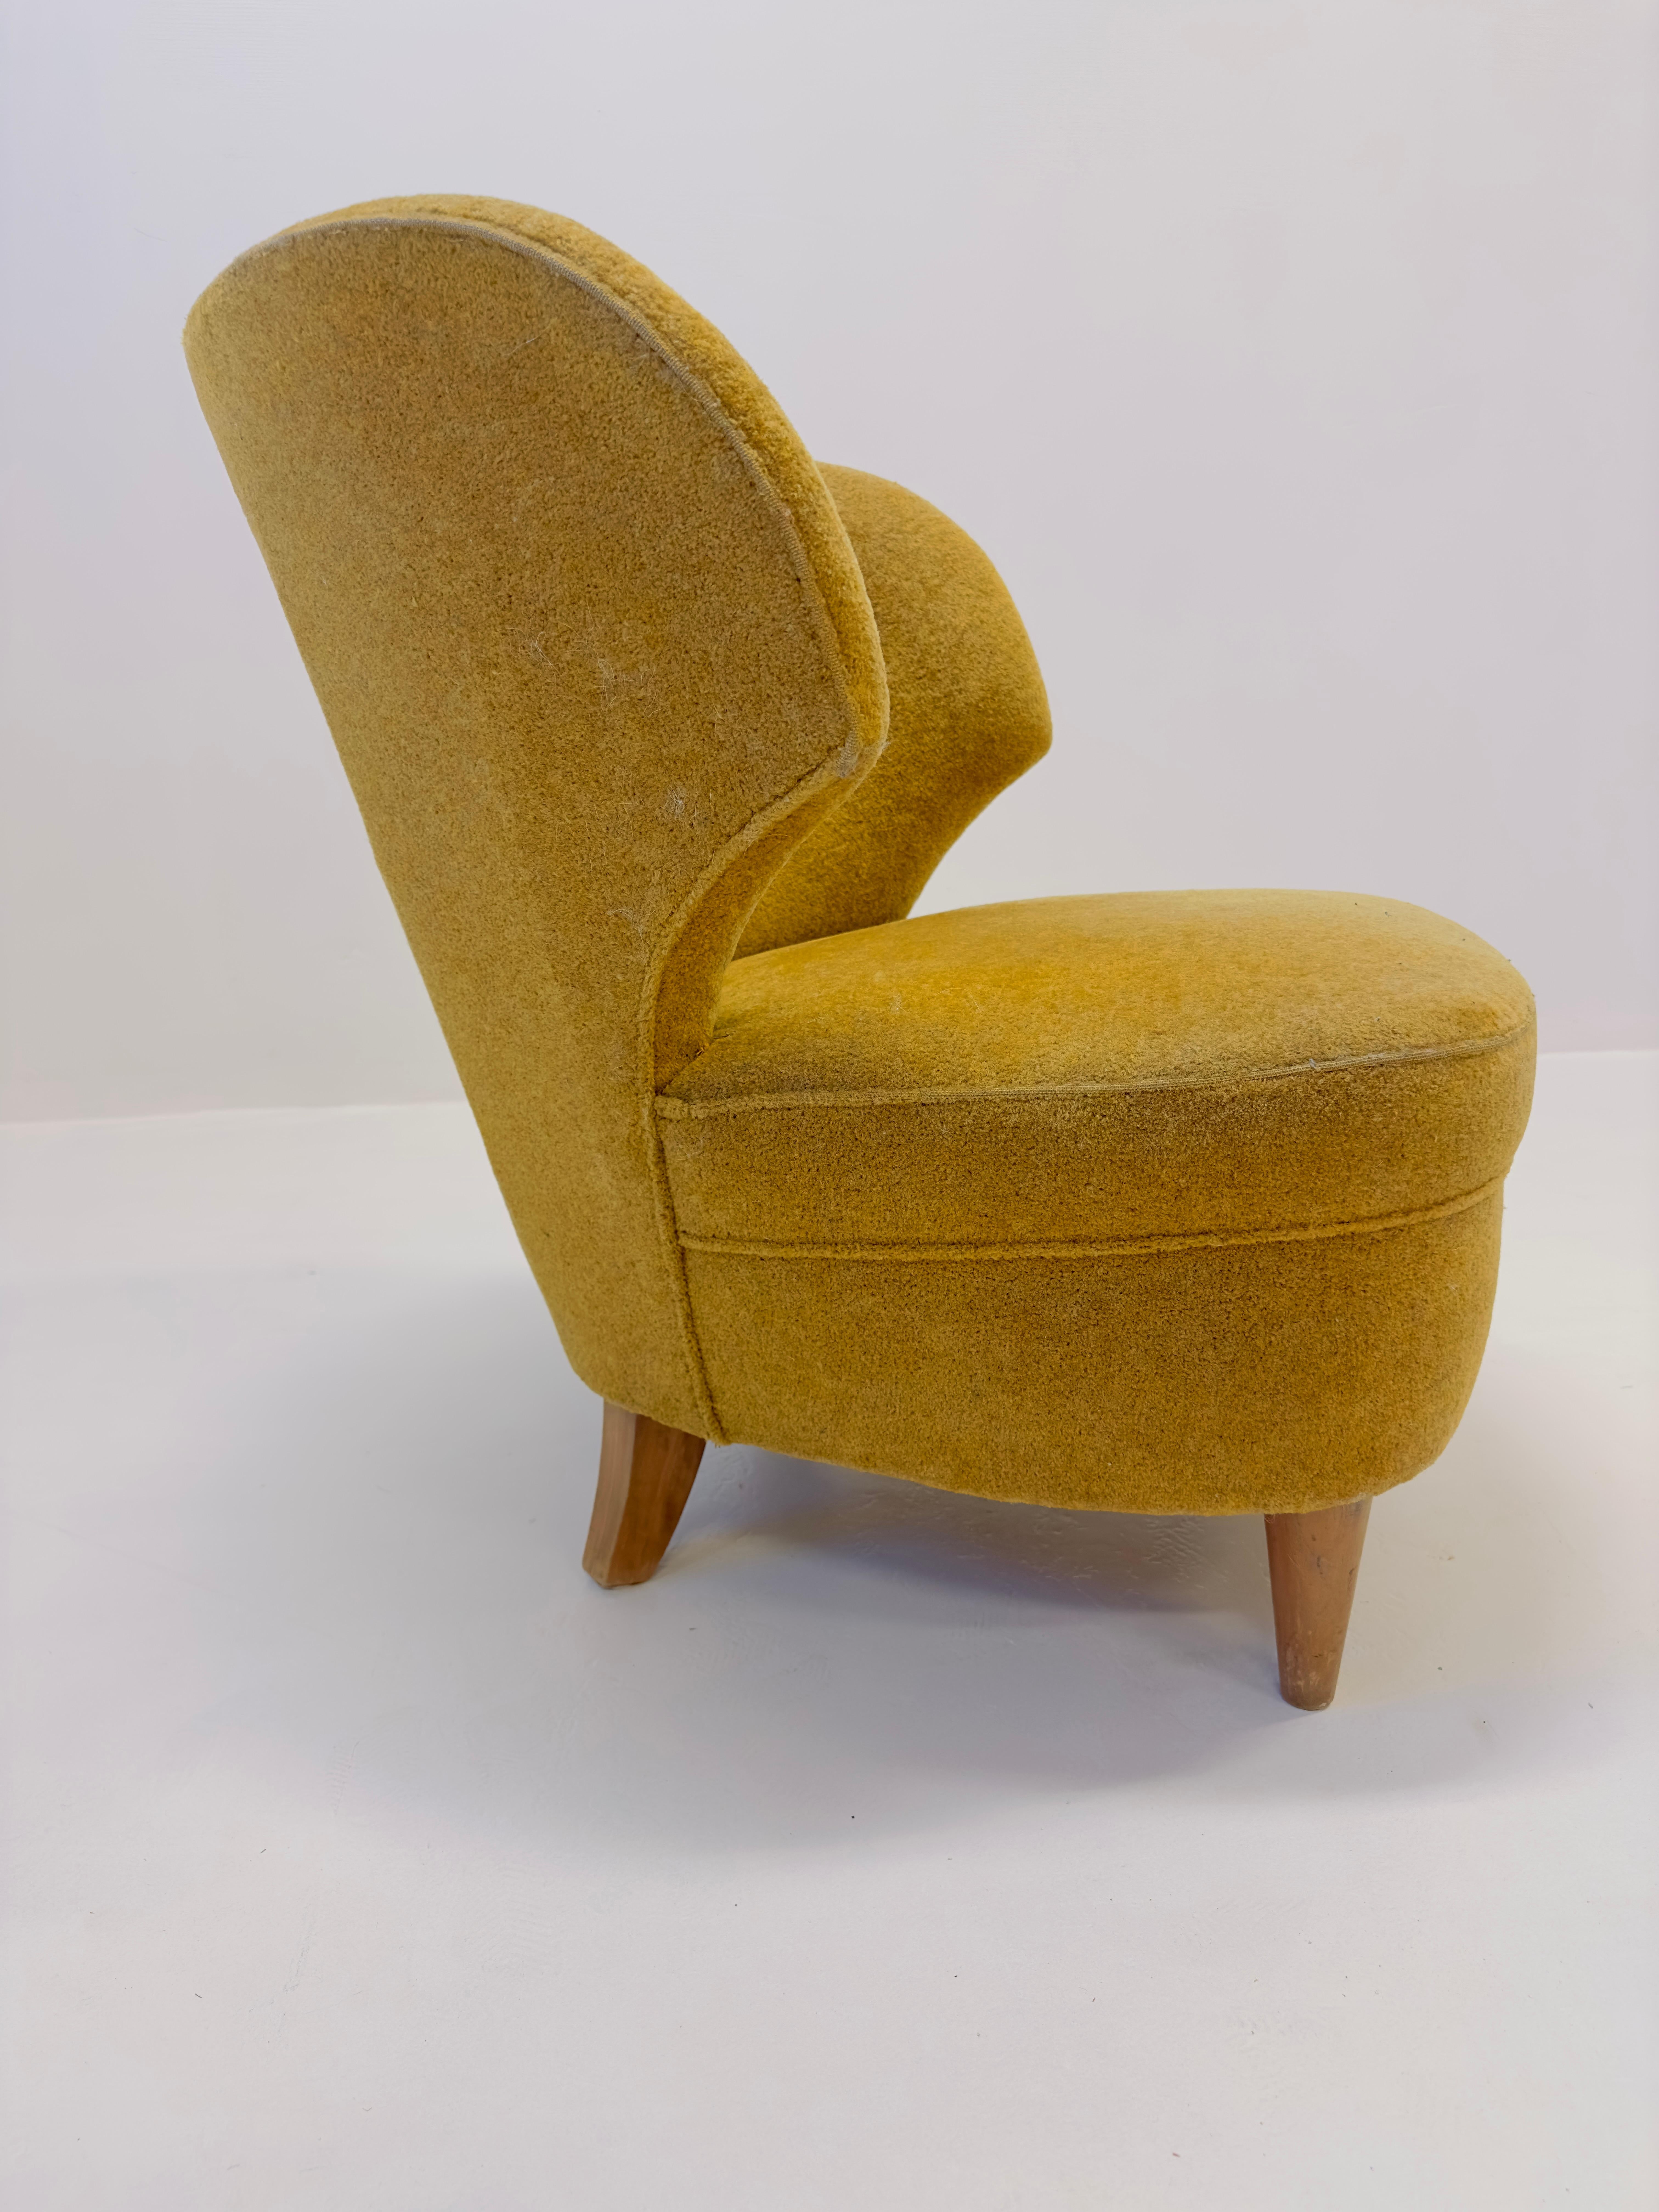 Rare pair of Carl-Johan Boman armchairs.

Price is for the pair.

Currently upholstered in mustard coloured fabric. 

Fast shipping from Sweden, all over the world. White glove packaging. 